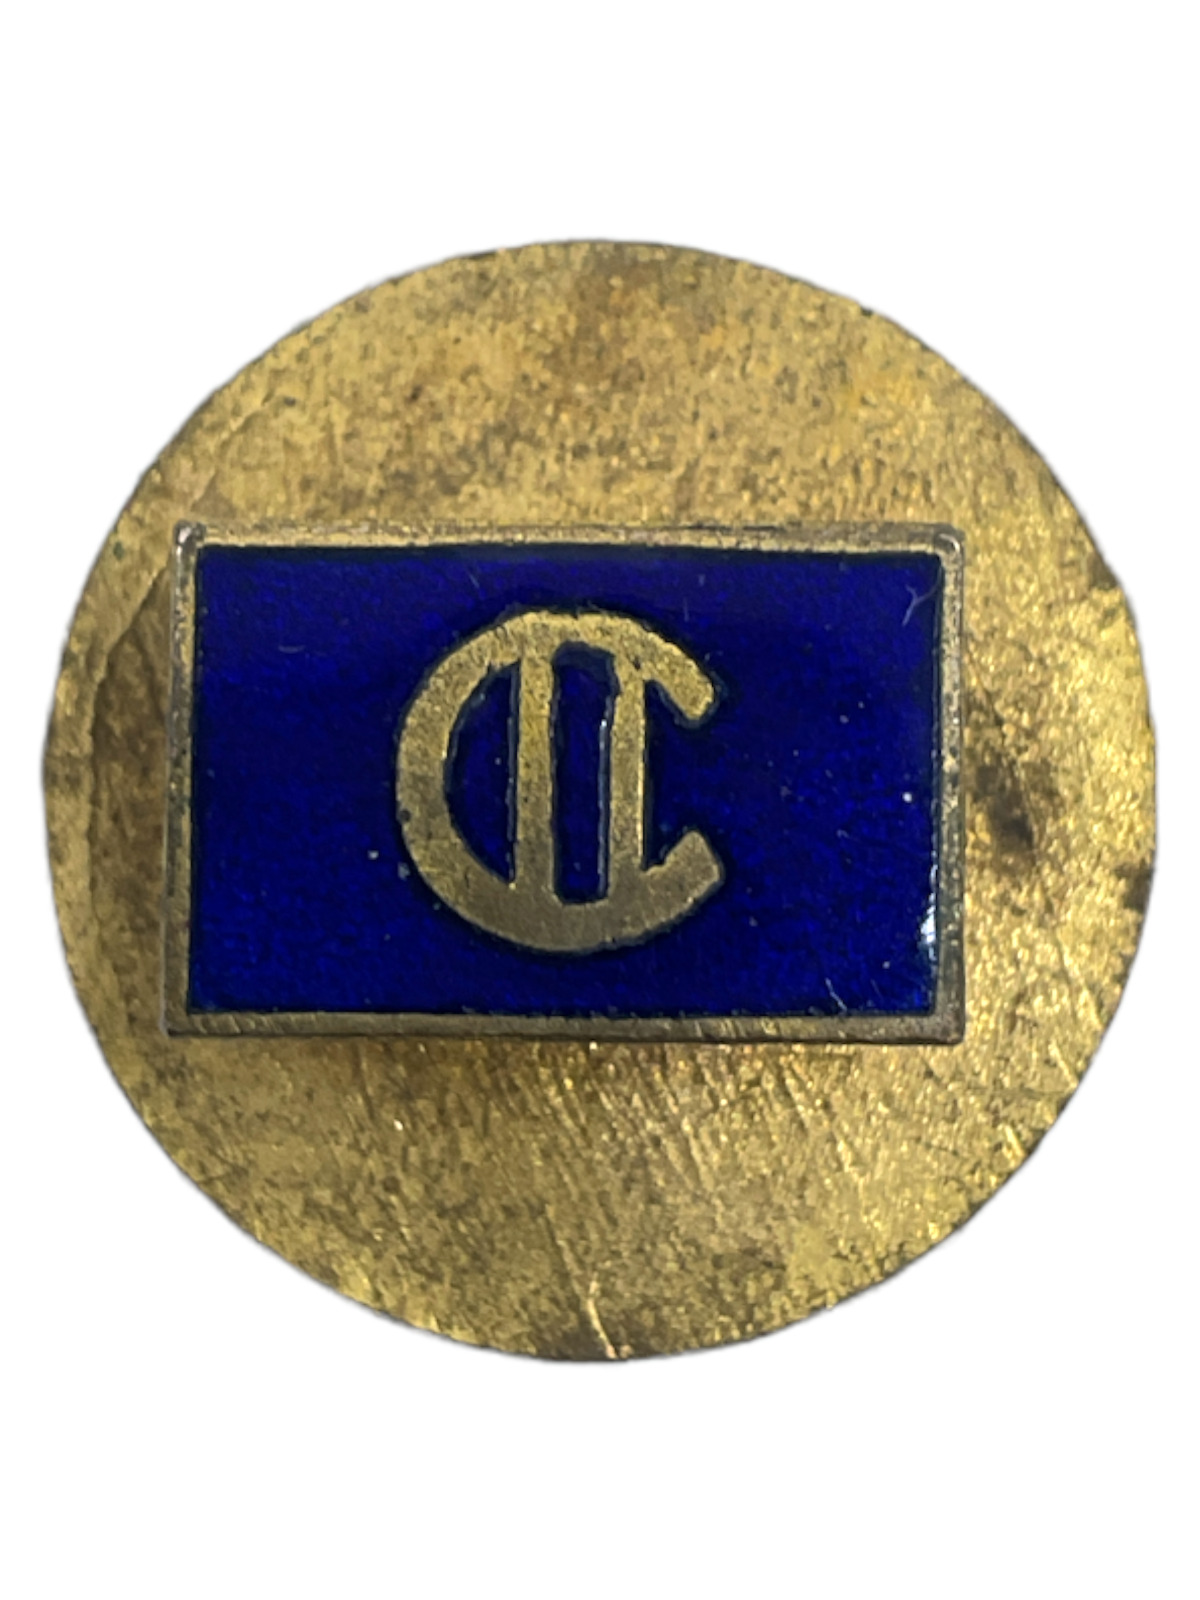 Ww1 Canadian Cef Veterans 2nd Division Lapel Pin